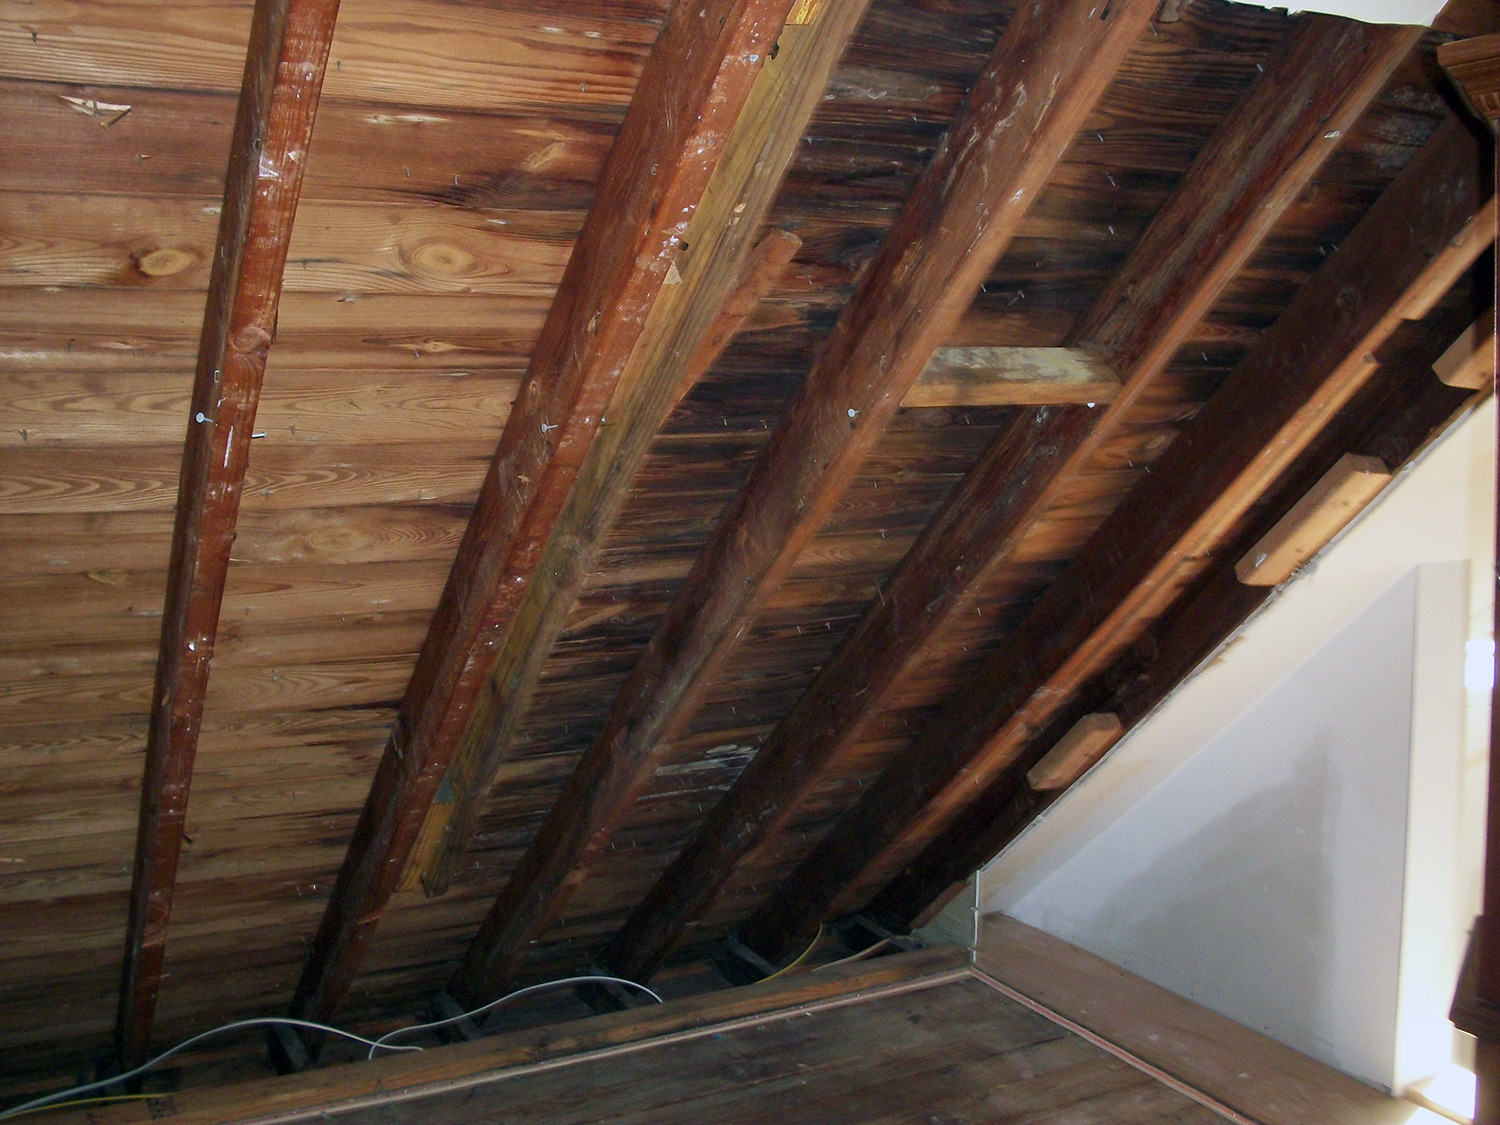 Wet roof boards inside the attic with mold spreading on contaminated surface